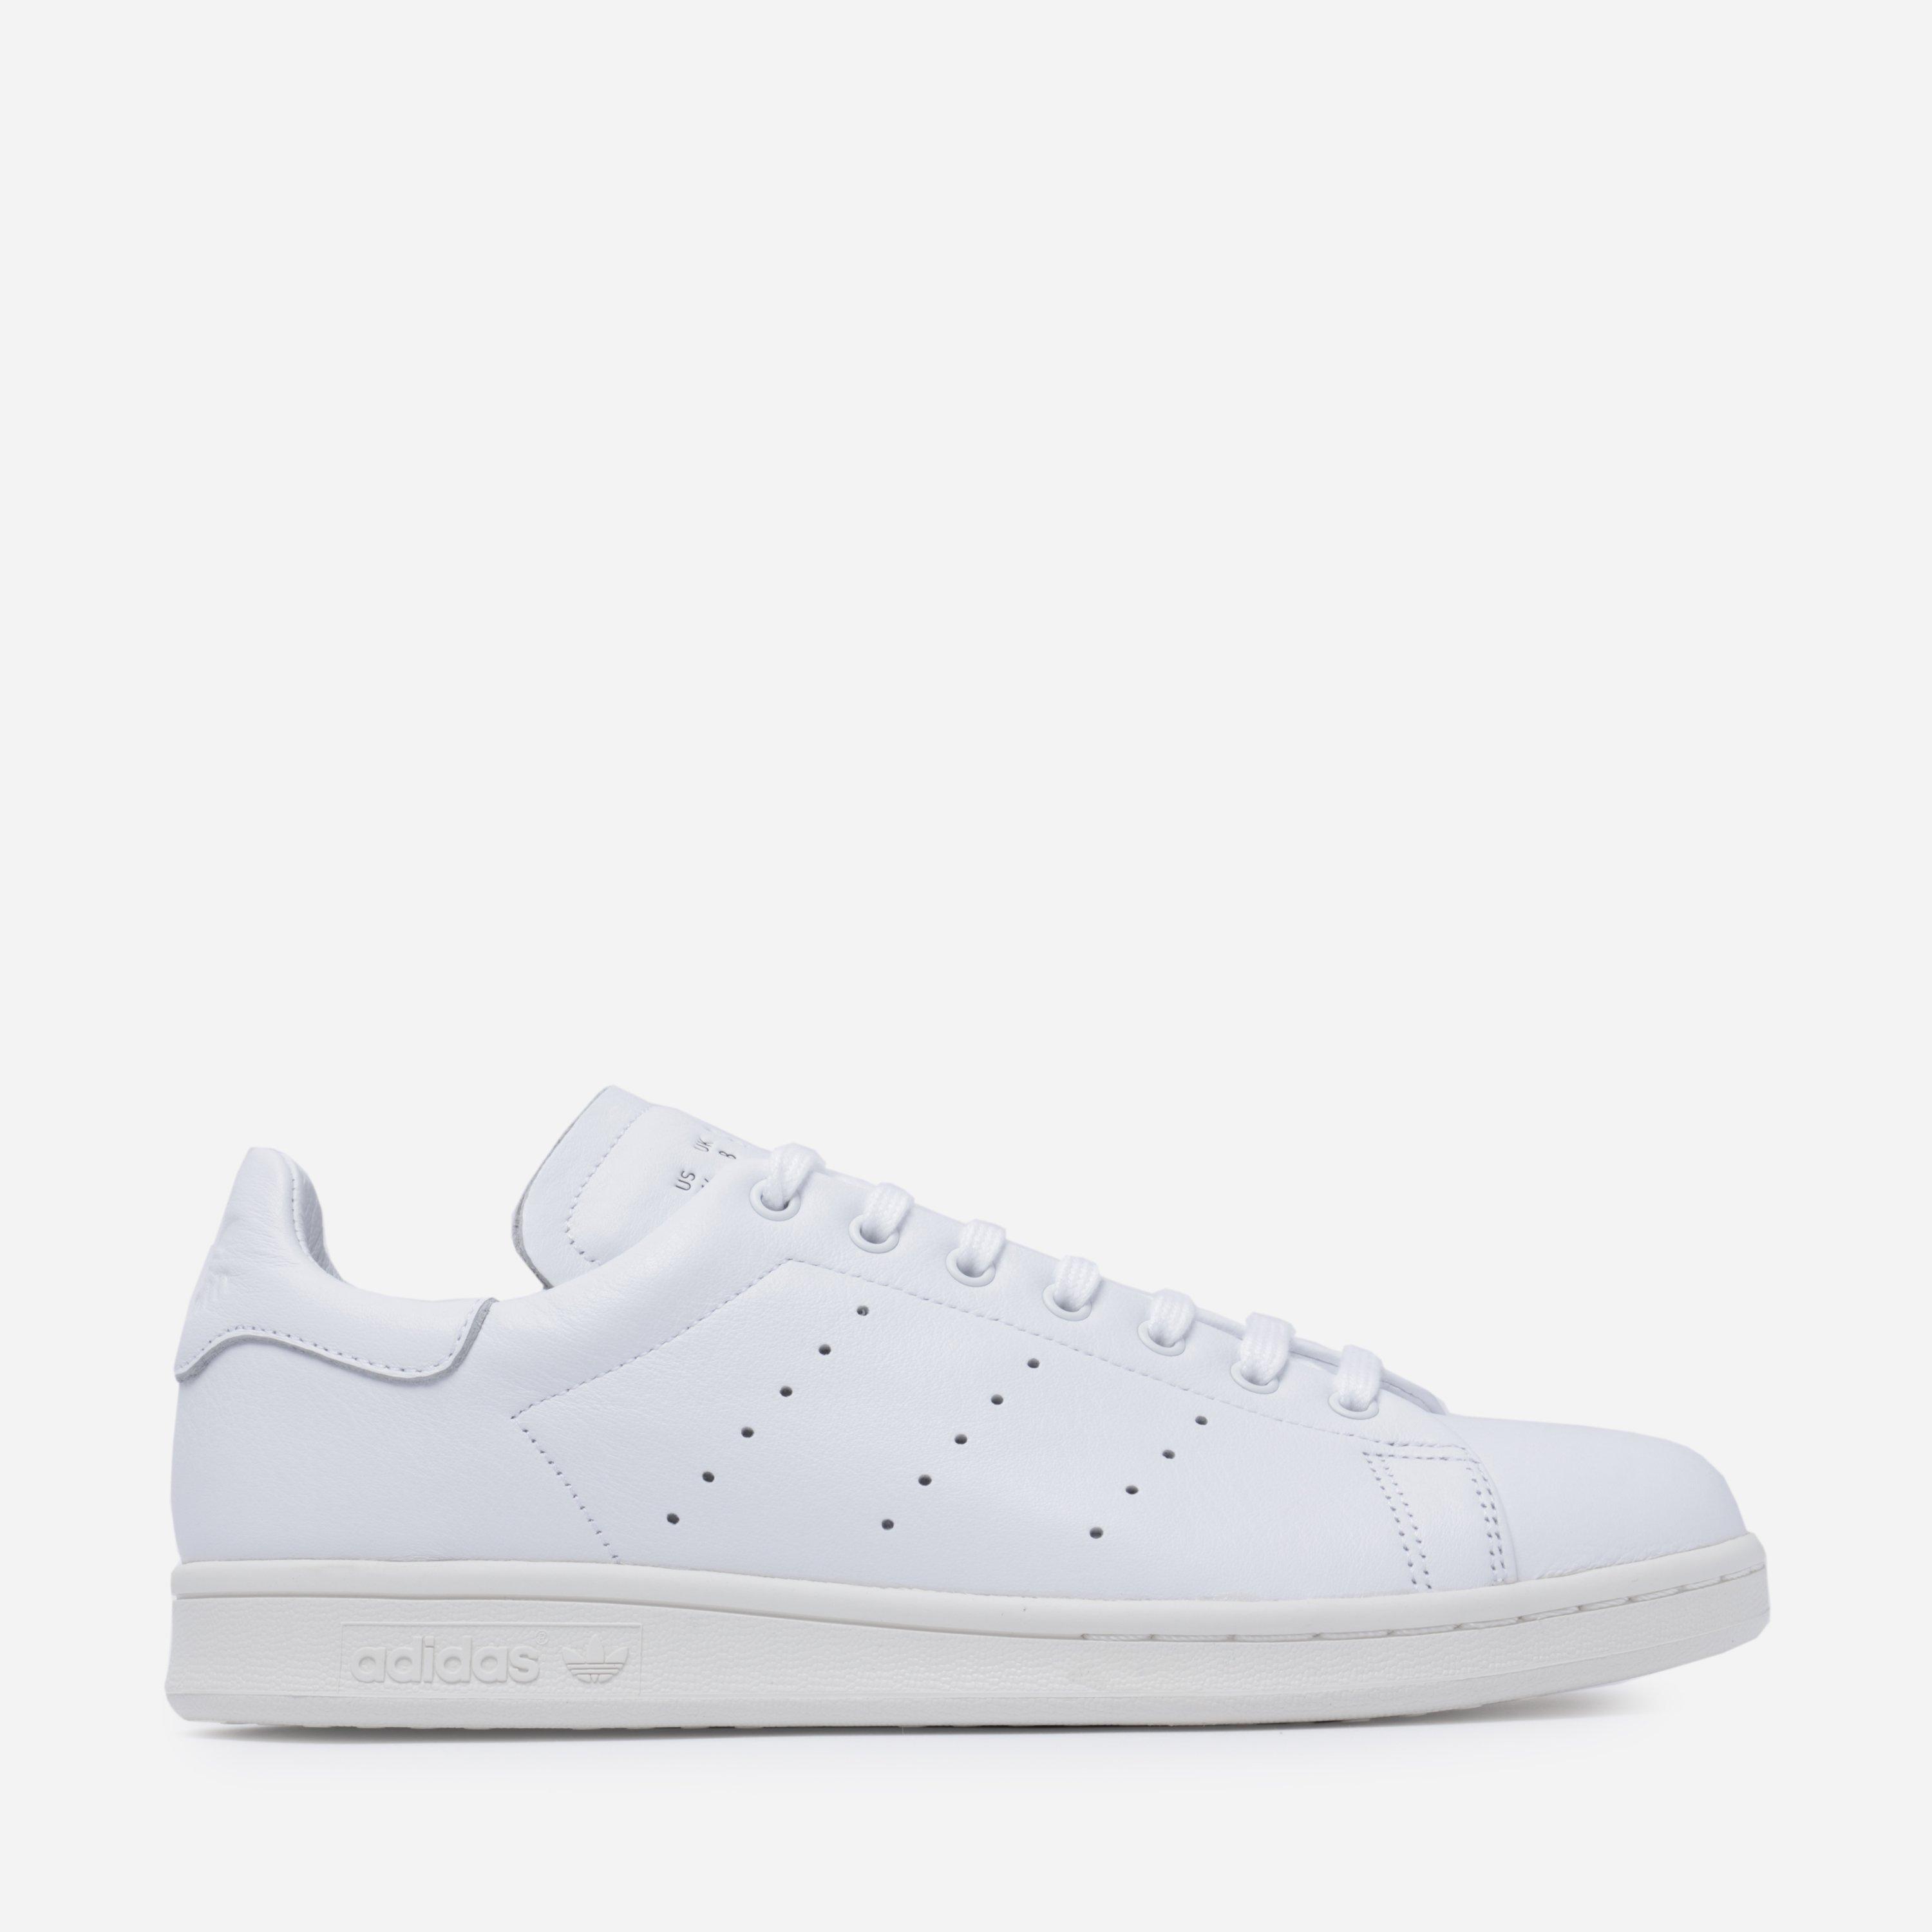 adidas Originals Leather 'stan Smith' Sneakers in White - Save 65% - Lyst